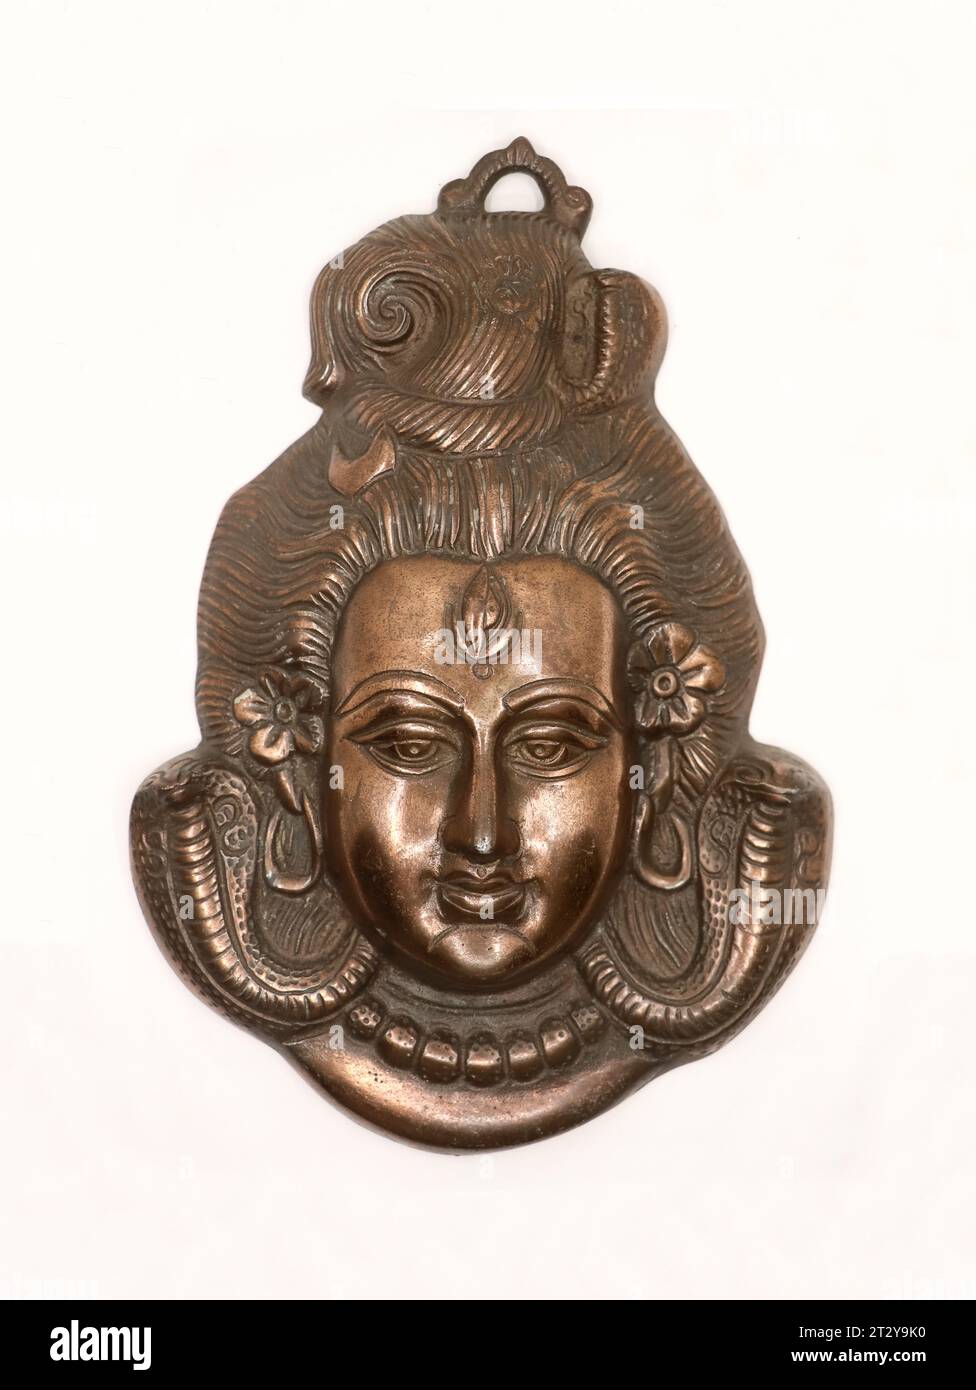 face statue of god shiv of hindu religion made of copper isolated Stock Photo